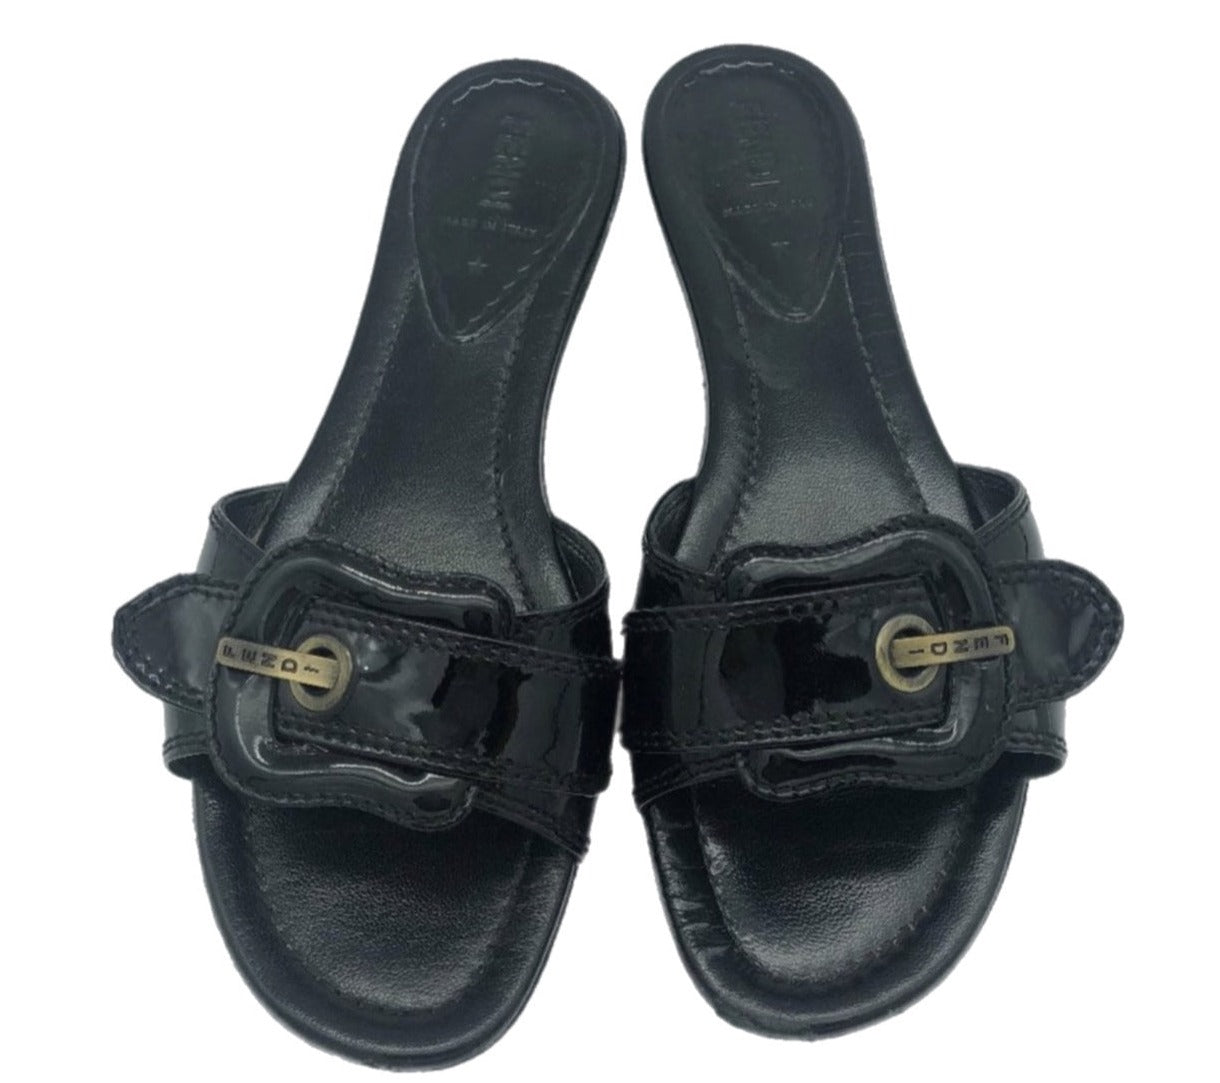 Fendi Vernice Buckle Sandals/Slides - Sleek and stylish black footwear for women, adding a touch of elegance to any outfit.